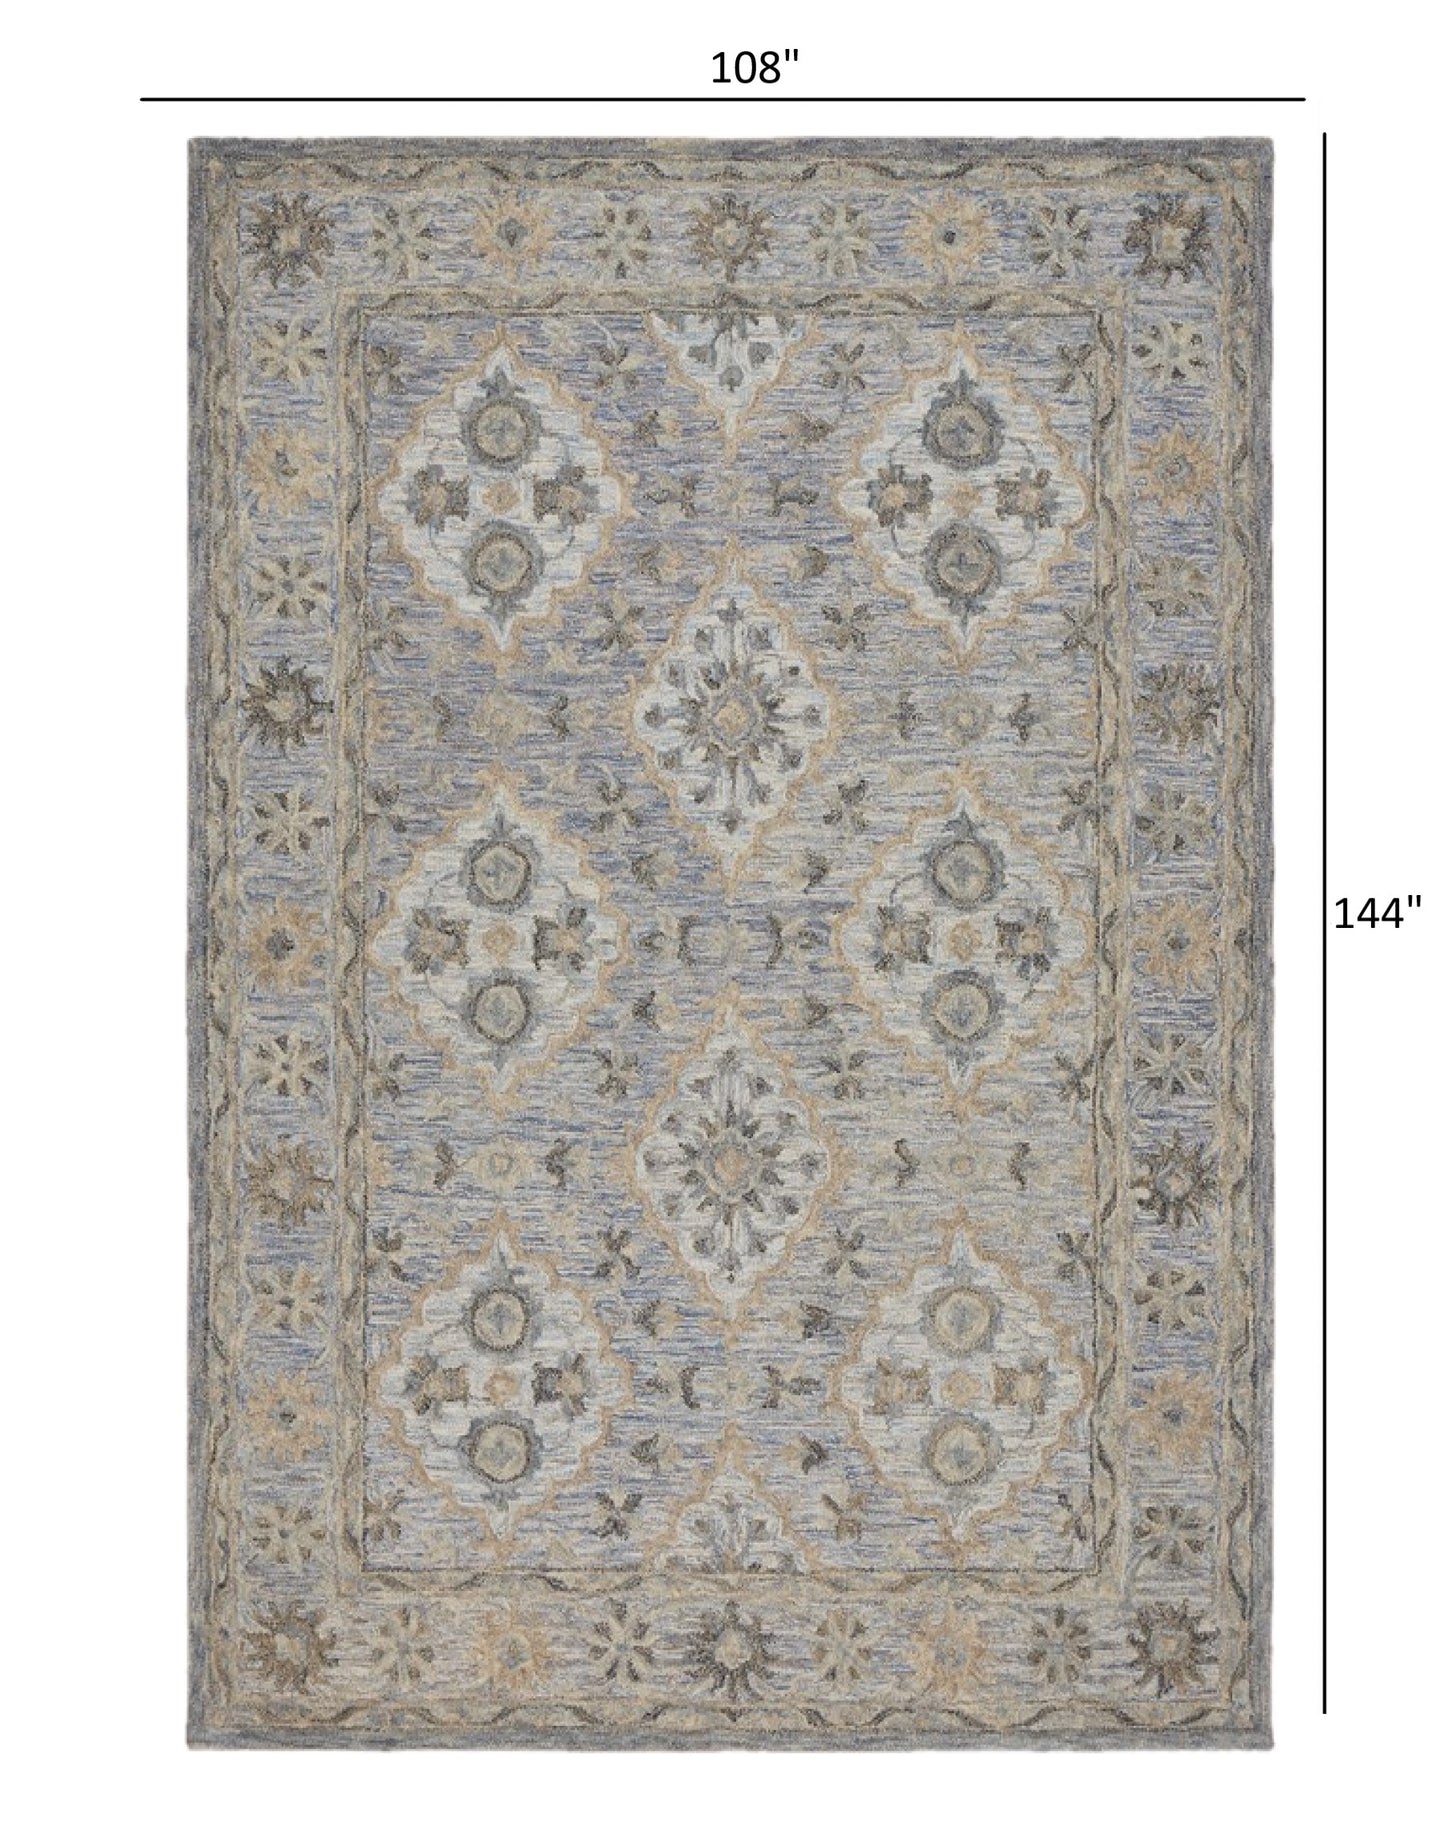 8’ x 10’ Blue and Tan Traditional Area Rug